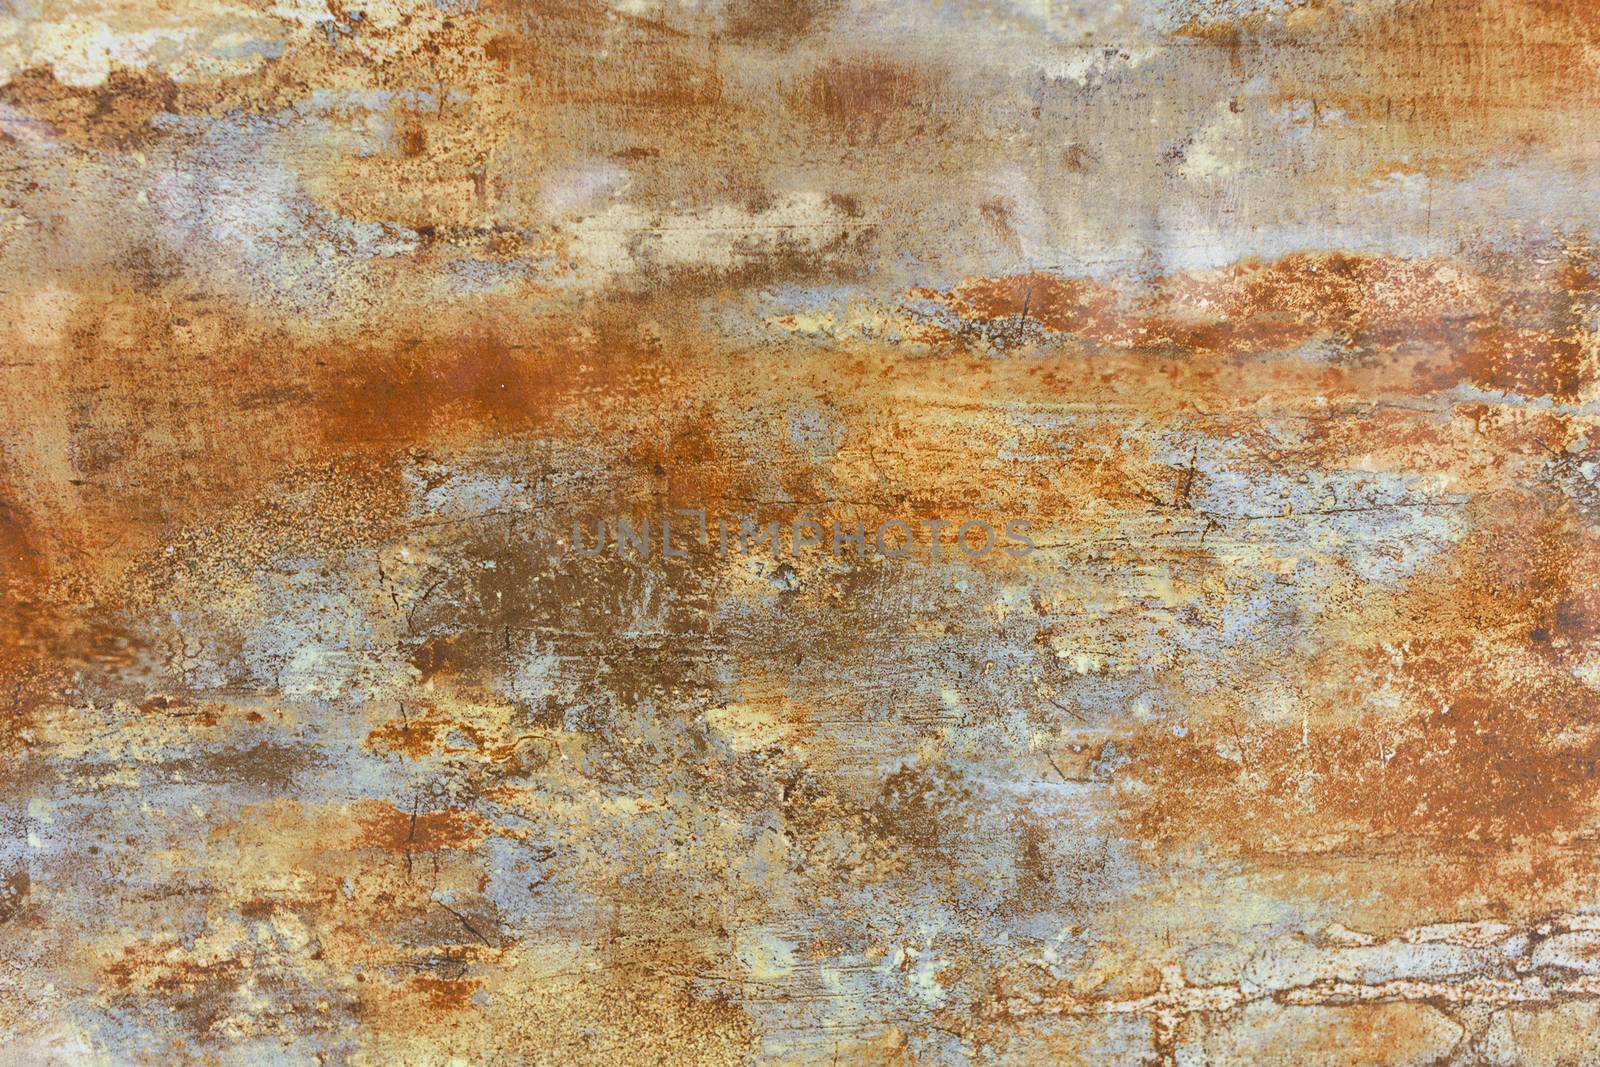 Unusual vintage texture of brown steel sheet of old metal with rust coated and gray patina spots.